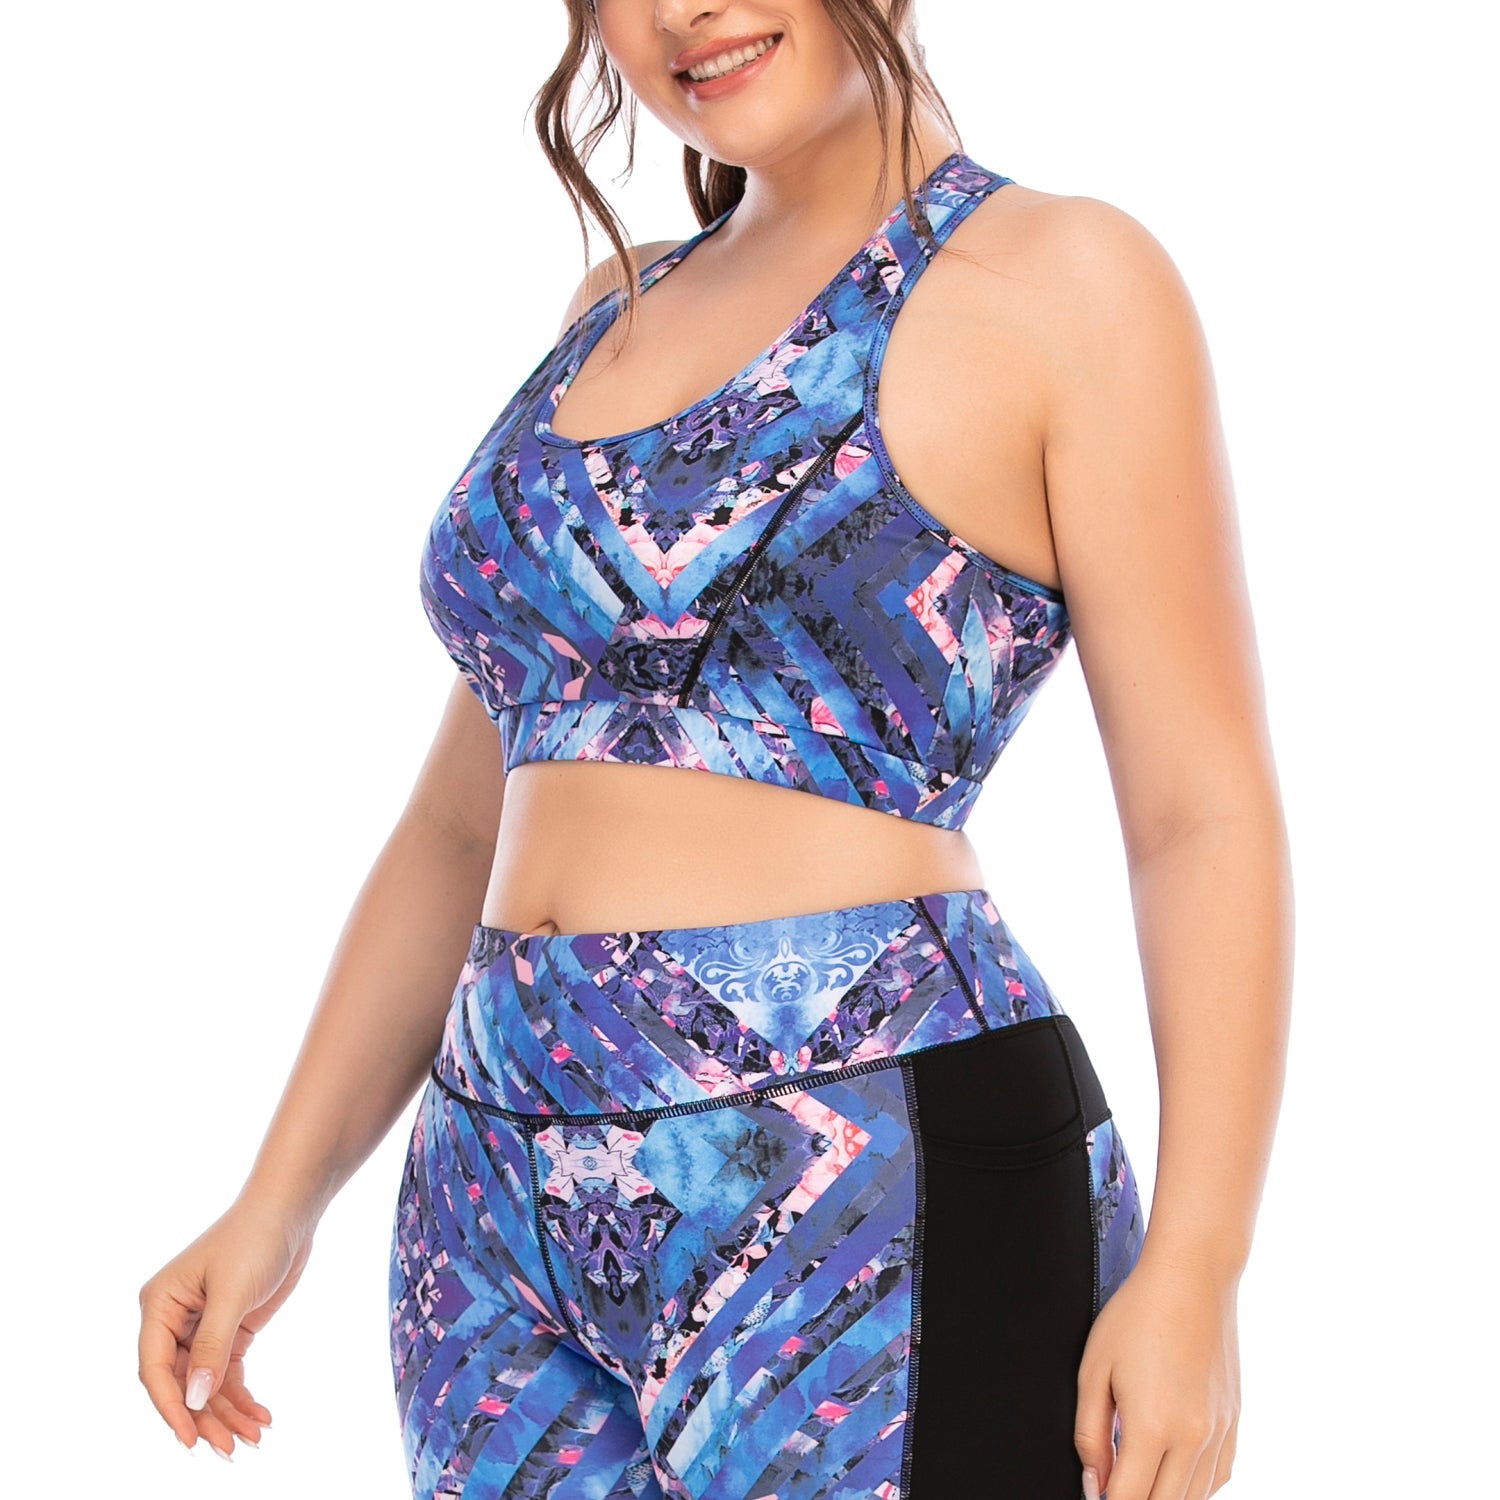 Printed Vivid Color Yoga Tops for Plus Size